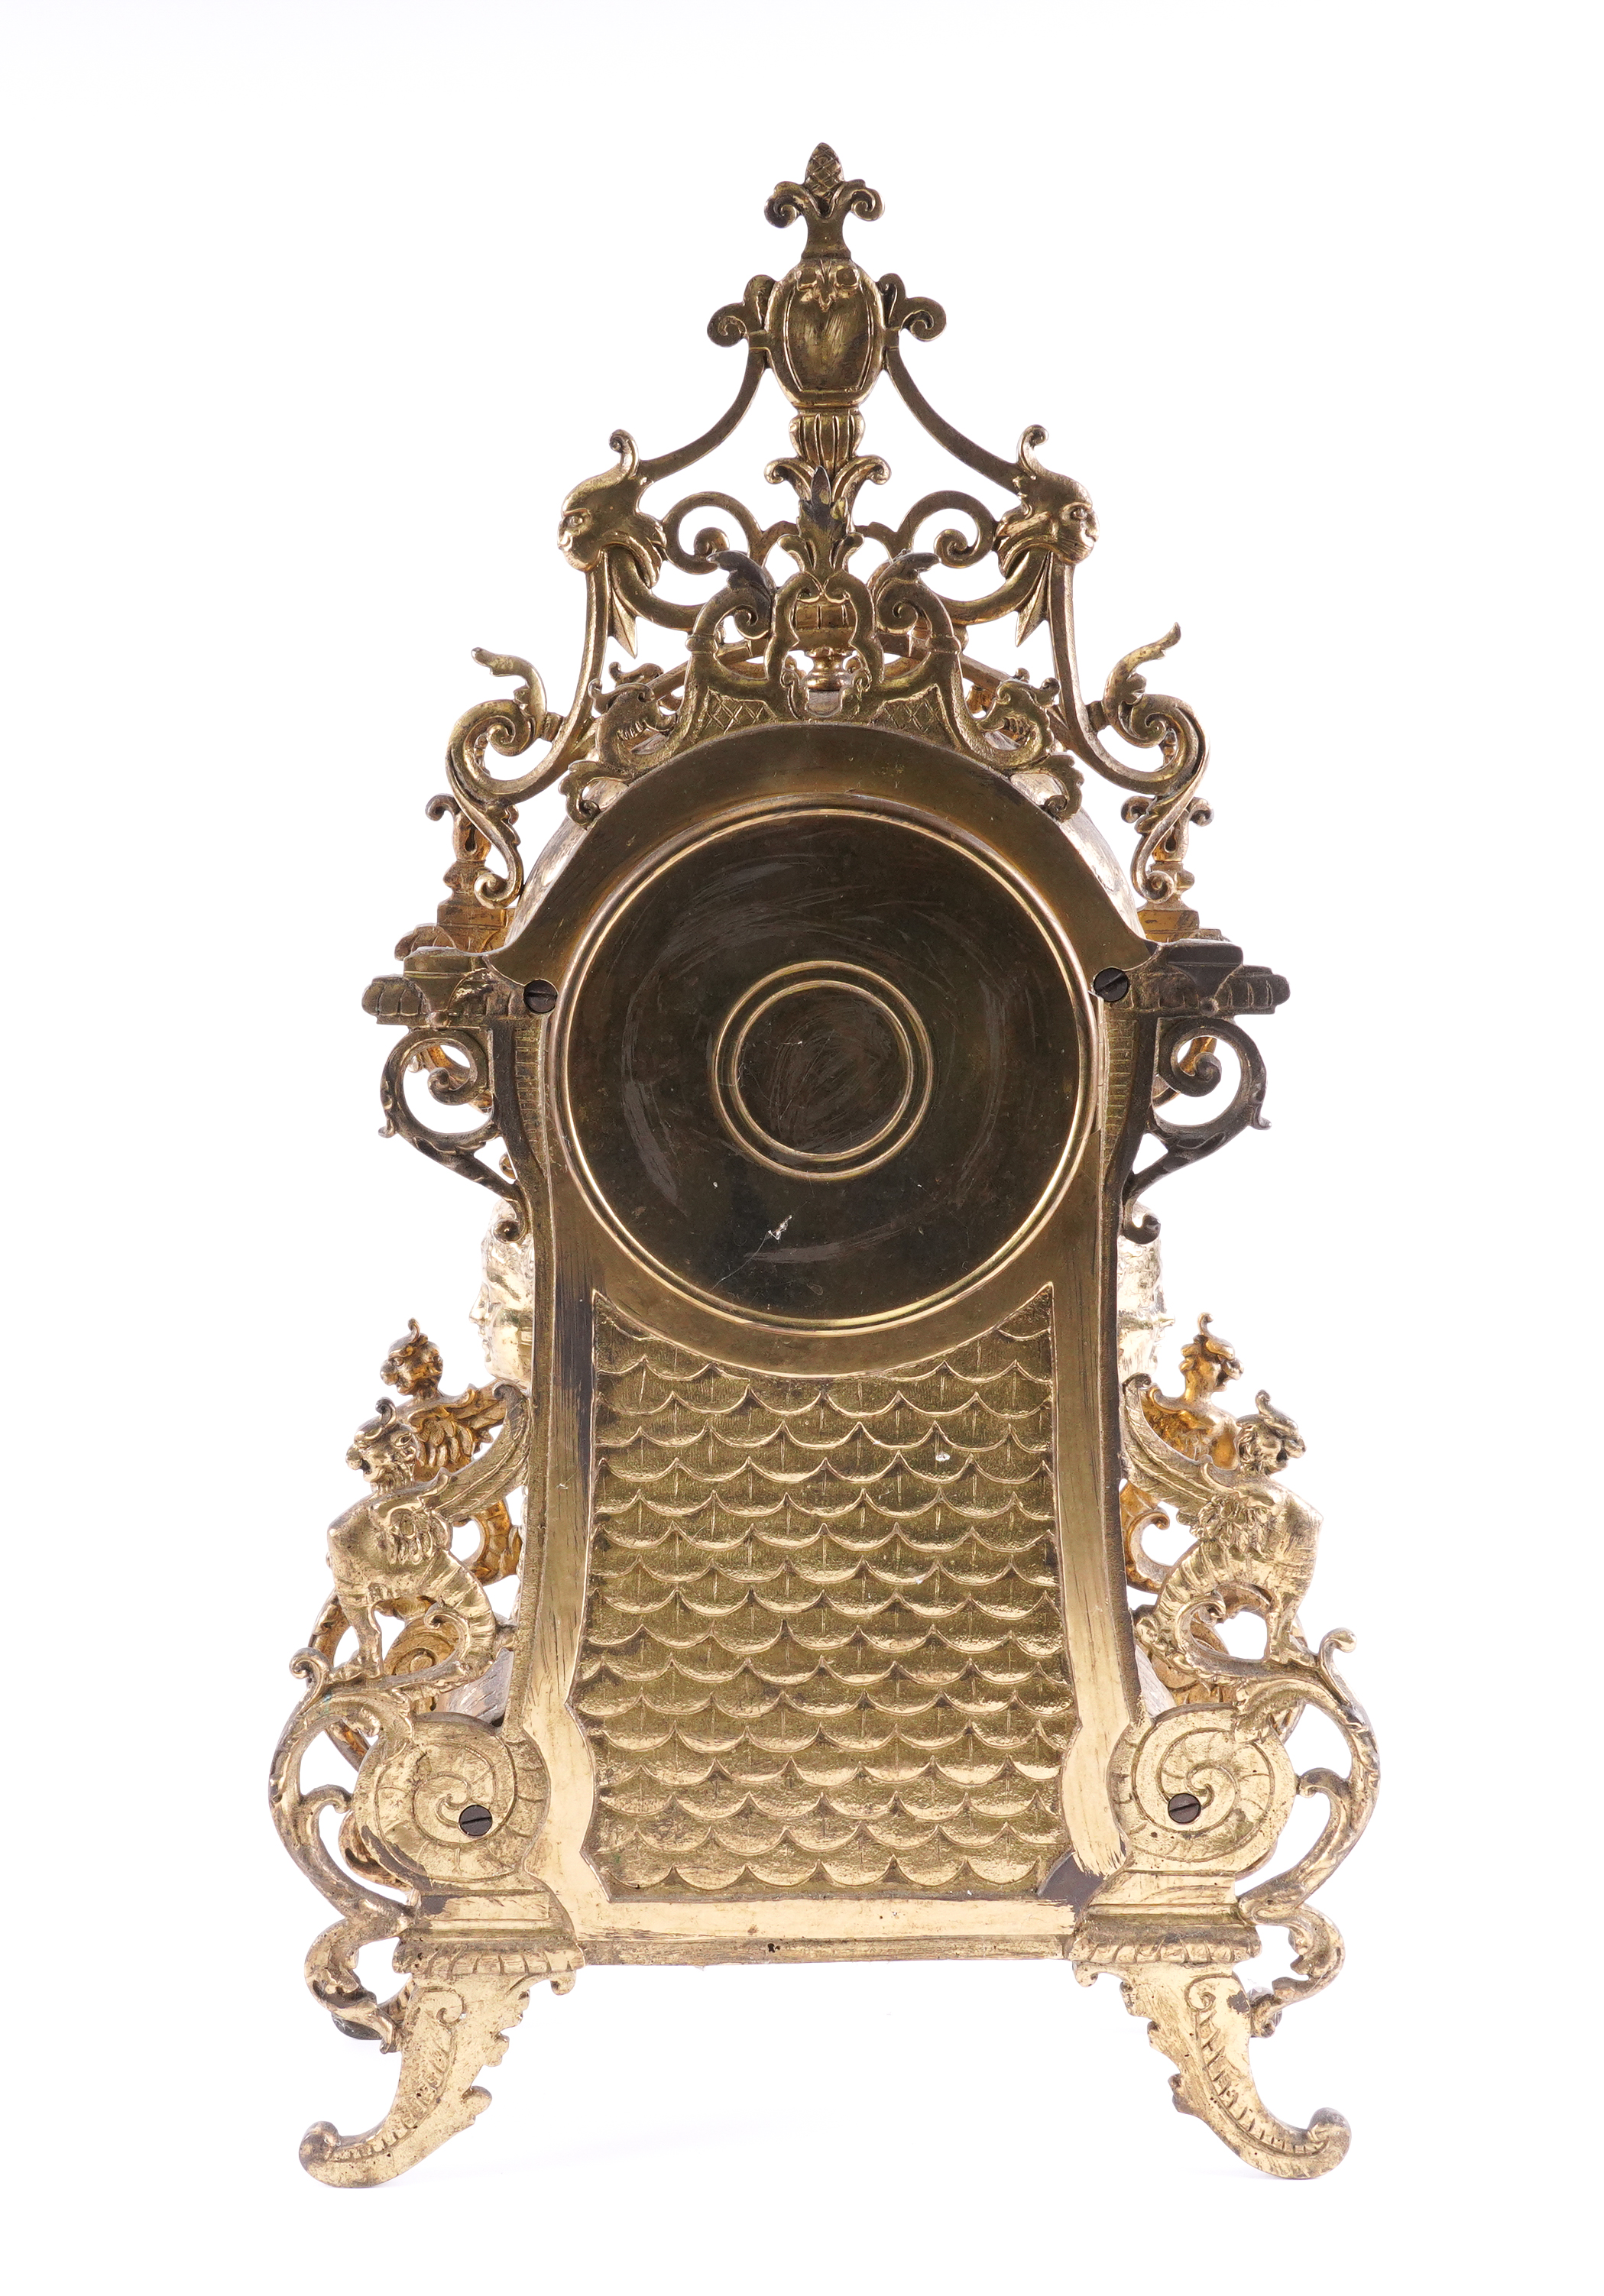 A FRENCH GILT-METAL MOUNTED MANTEL CLOCK - Image 3 of 5